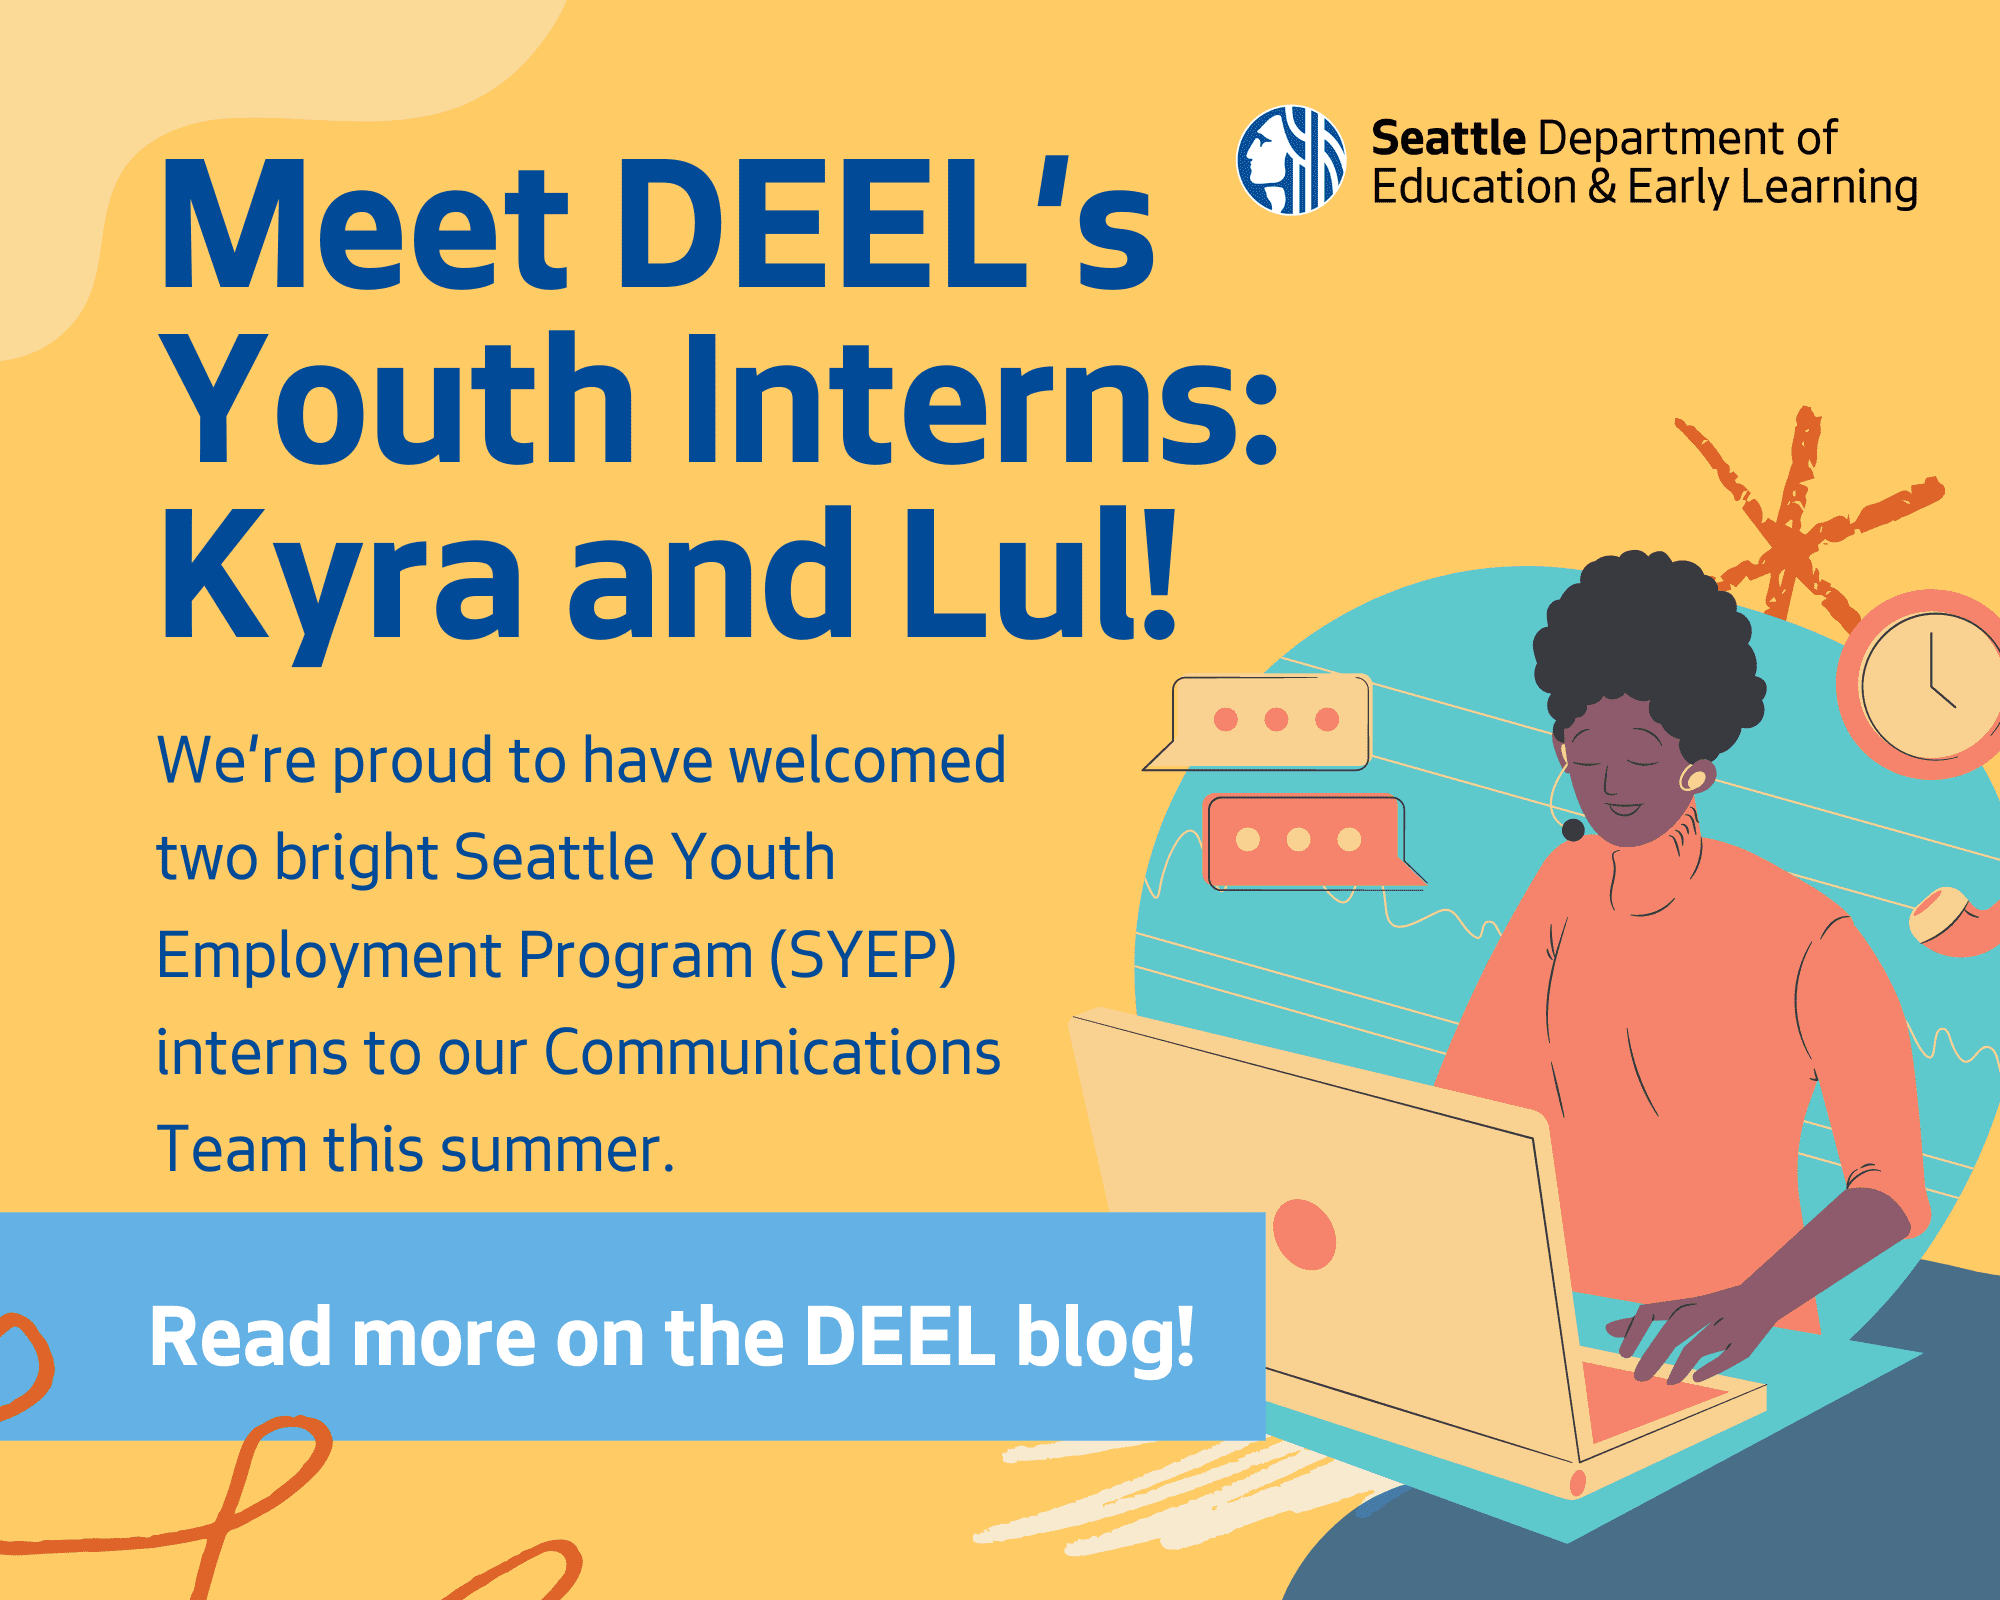 We're proud to have welcome two bright Seattle Youth Employment Program (SYEP) interns to our Communications Team this summer. Learn more on the DEEL Blog!